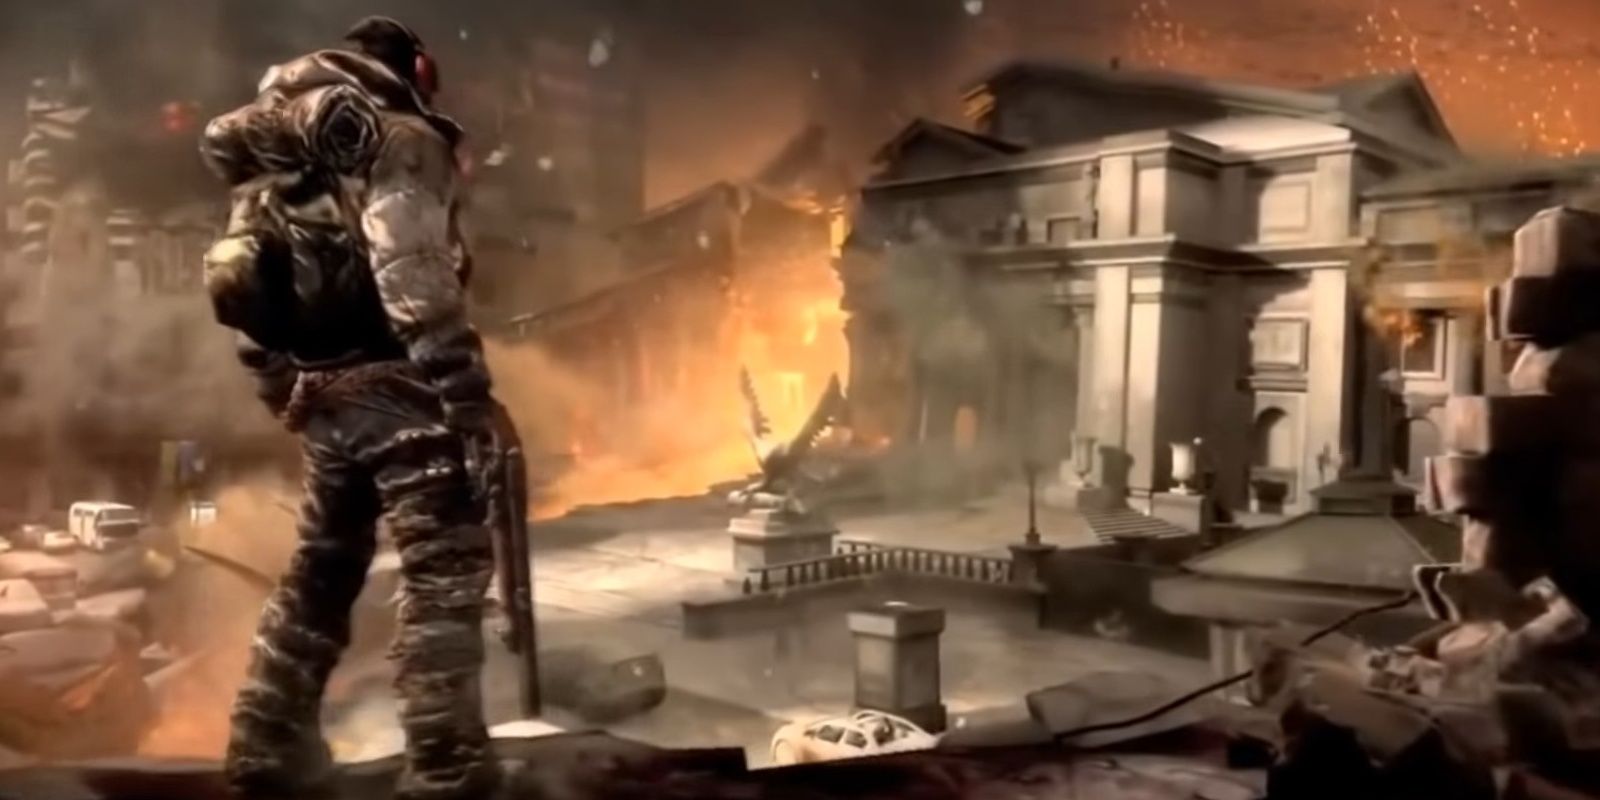 Early Doom 4 footage showing a soldier in a destroyed city.